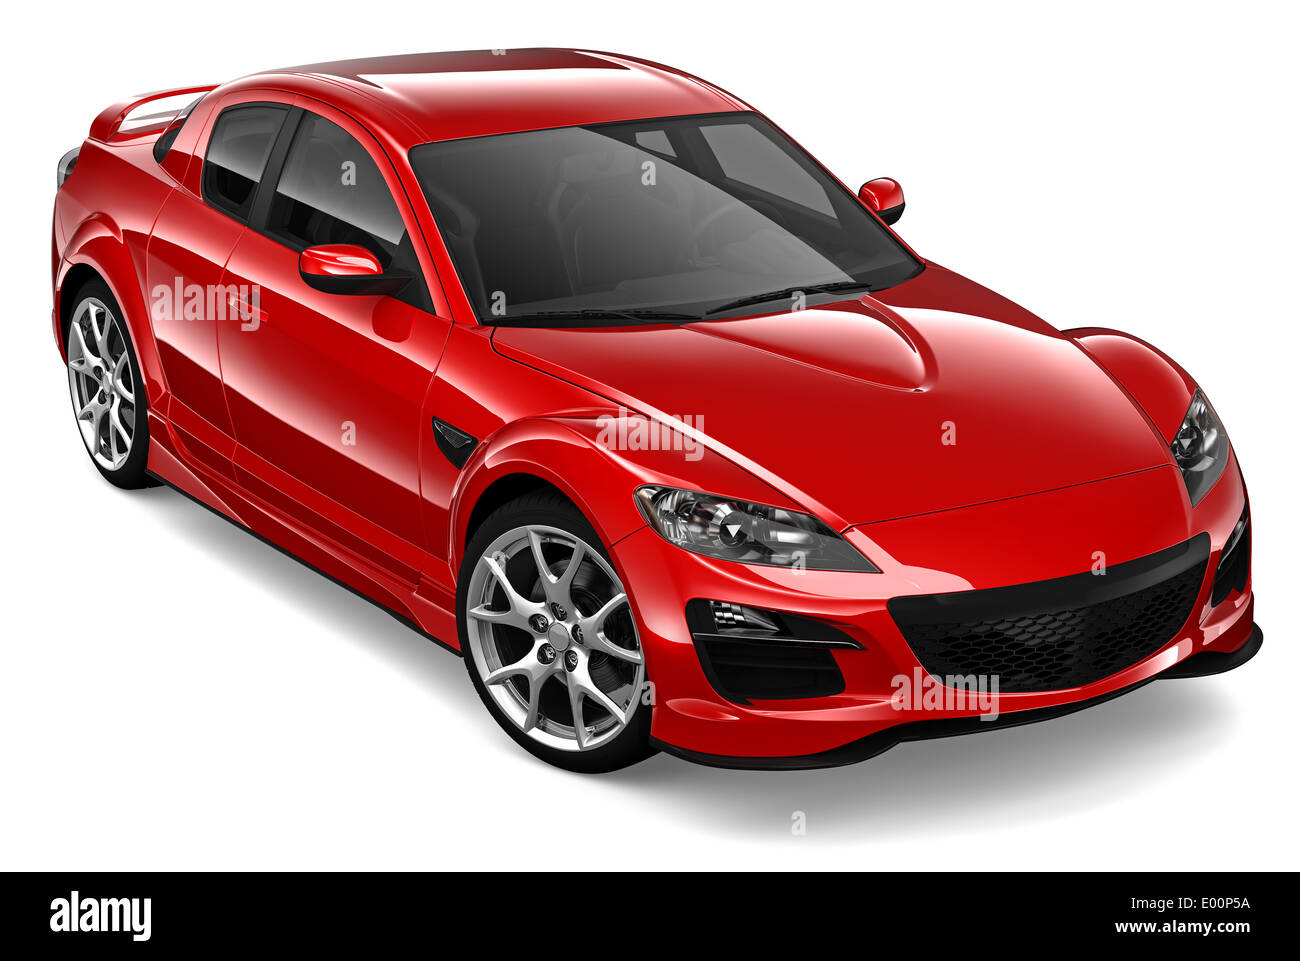 Red couper car Stock Photo